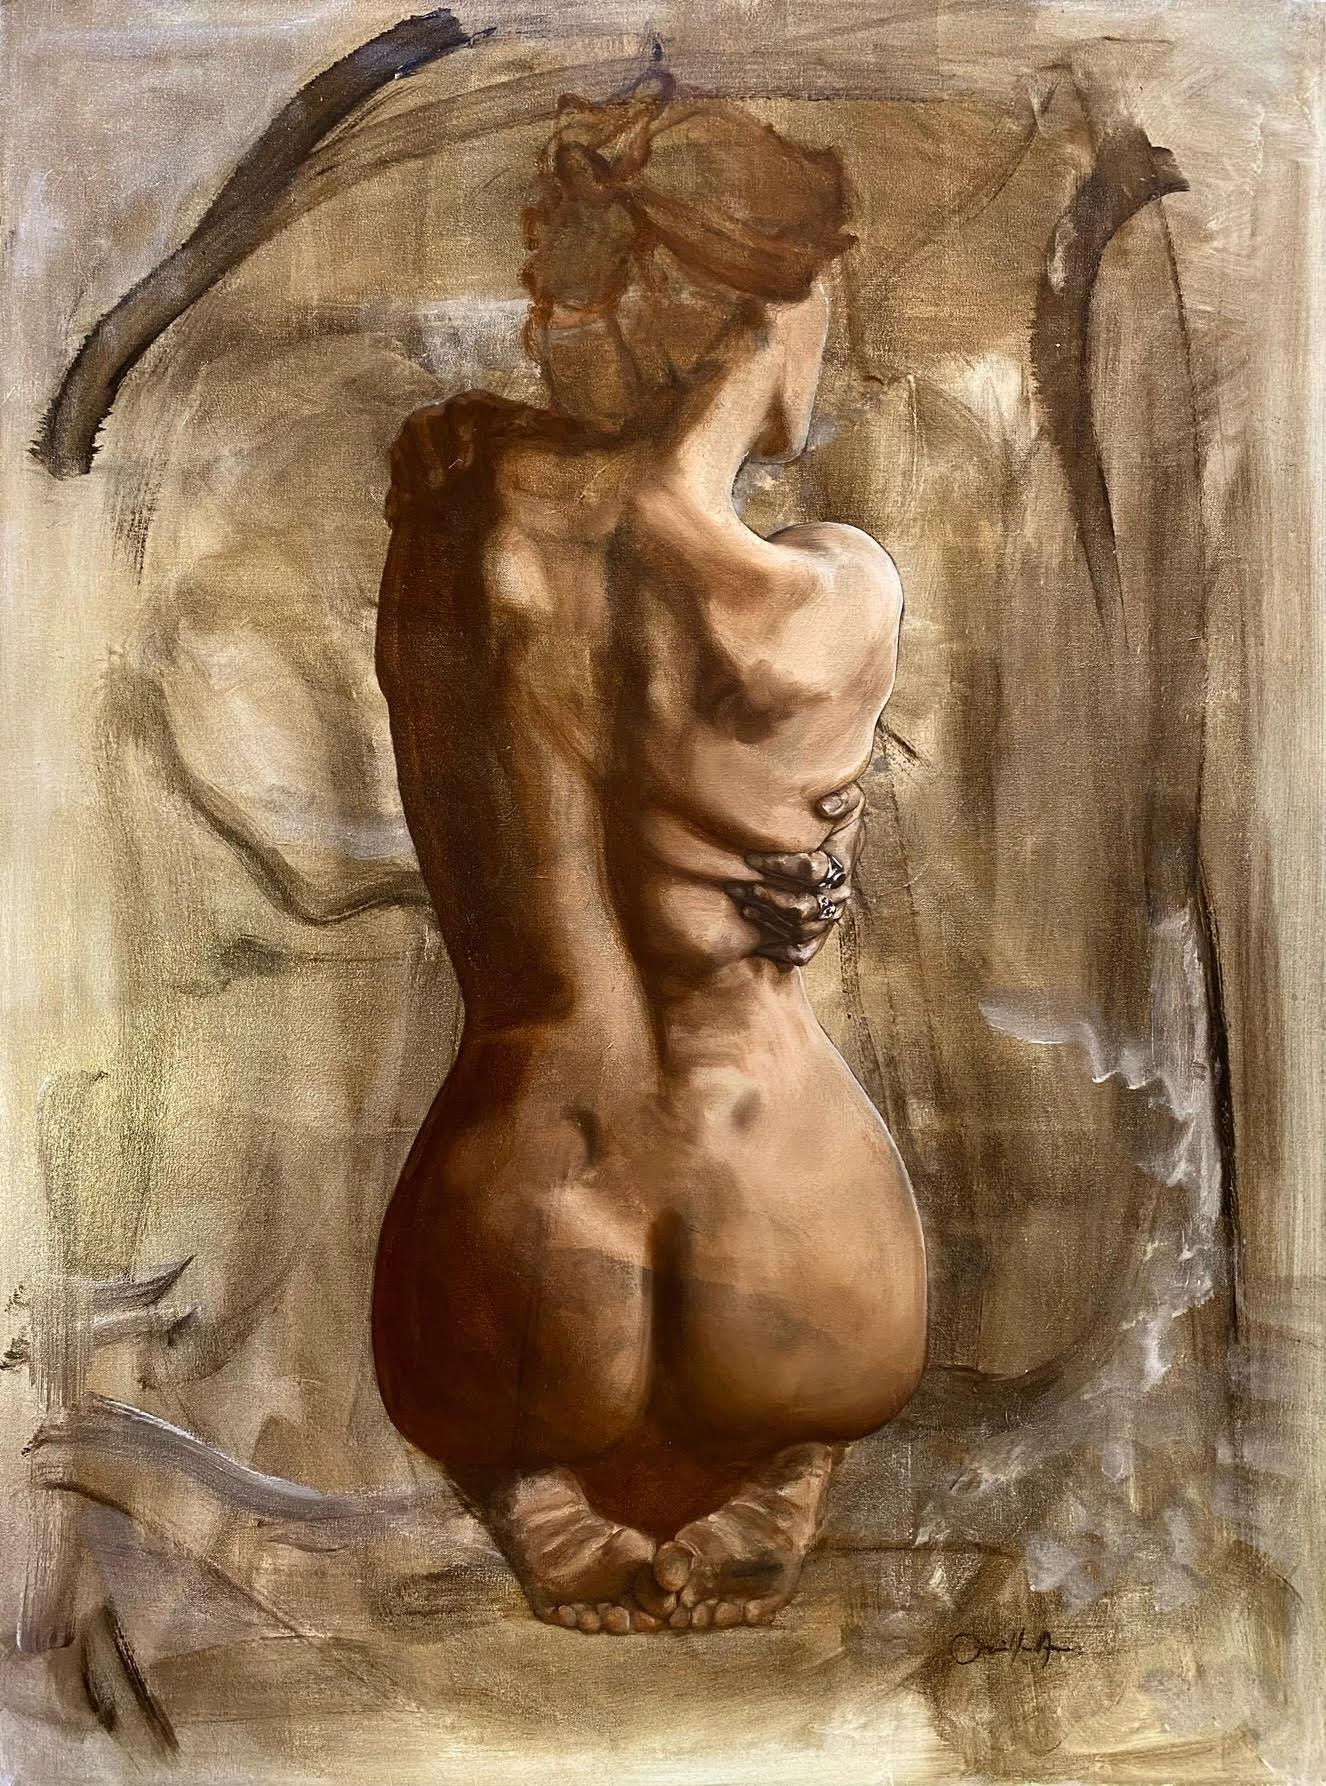 Orielle Caldwell Figurative Painting - 'Tensegrity' Oil Painting by Orielle - Female Nudes Art